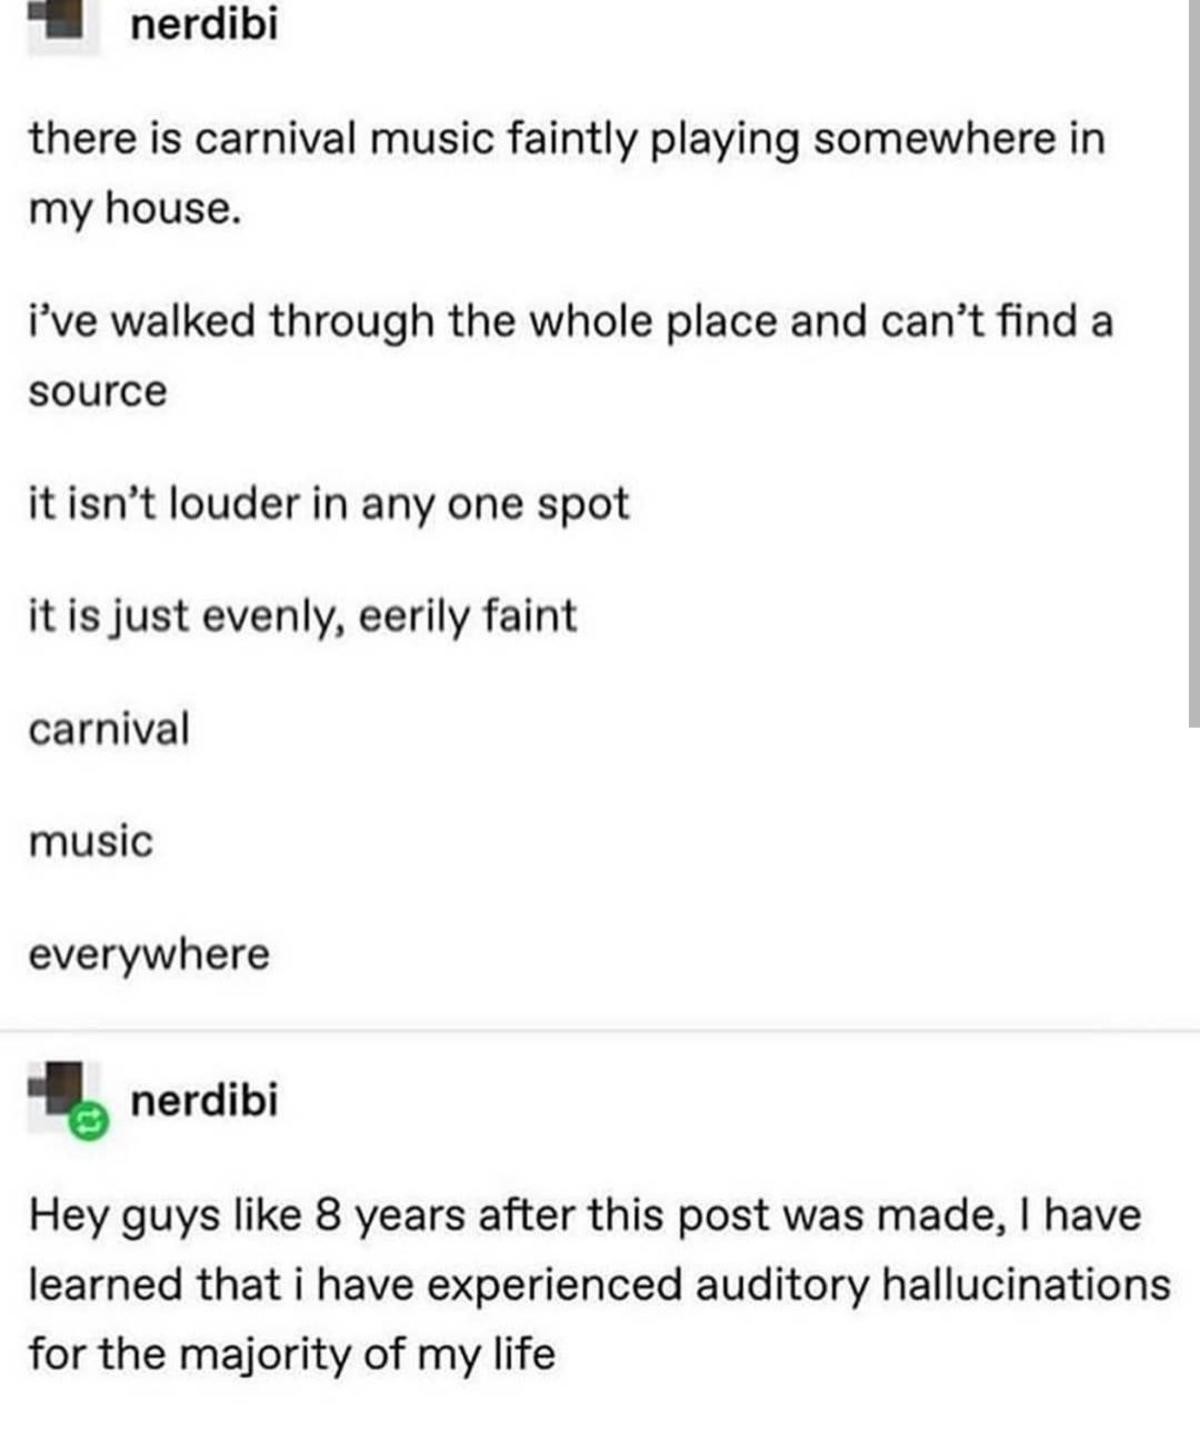 document - nerdibi there is carnival music faintly playing somewhere in my house. i've walked through the whole place and can't find a source it isn't louder in any one spot it is just evenly, eerily faint carnival music everywhere nerdibi Hey guys 8 year